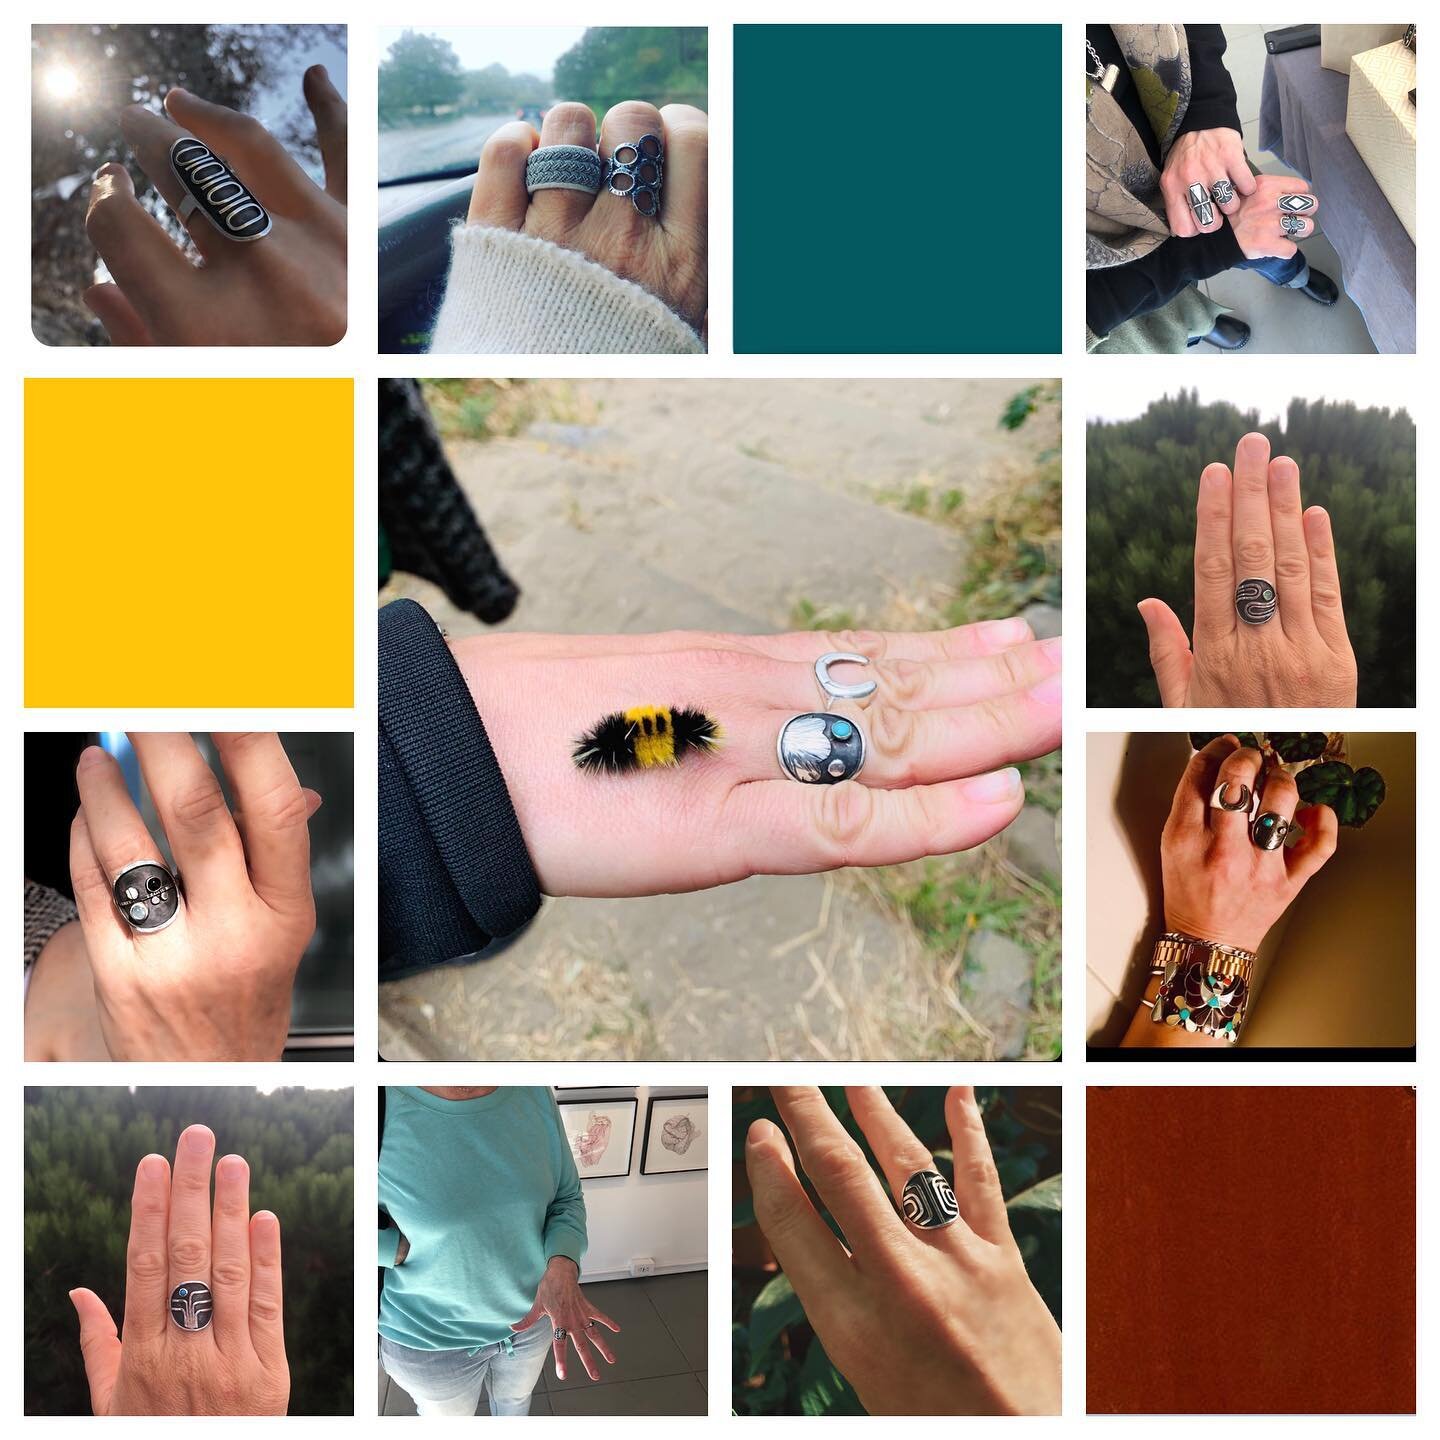 Wow! I really love this!💖
Thank you for sending your #ringselfie!🙏👋📸 ✨
It&rsquo;s the coolest thing to see you wearing the rings I&rsquo;ve made!!
☺️✨💖✨
.
*cannot be held responsible if they attract fuzzy creatures* 🐛😂
.
.
.
.
.
.
.
.
.
.
.
.
